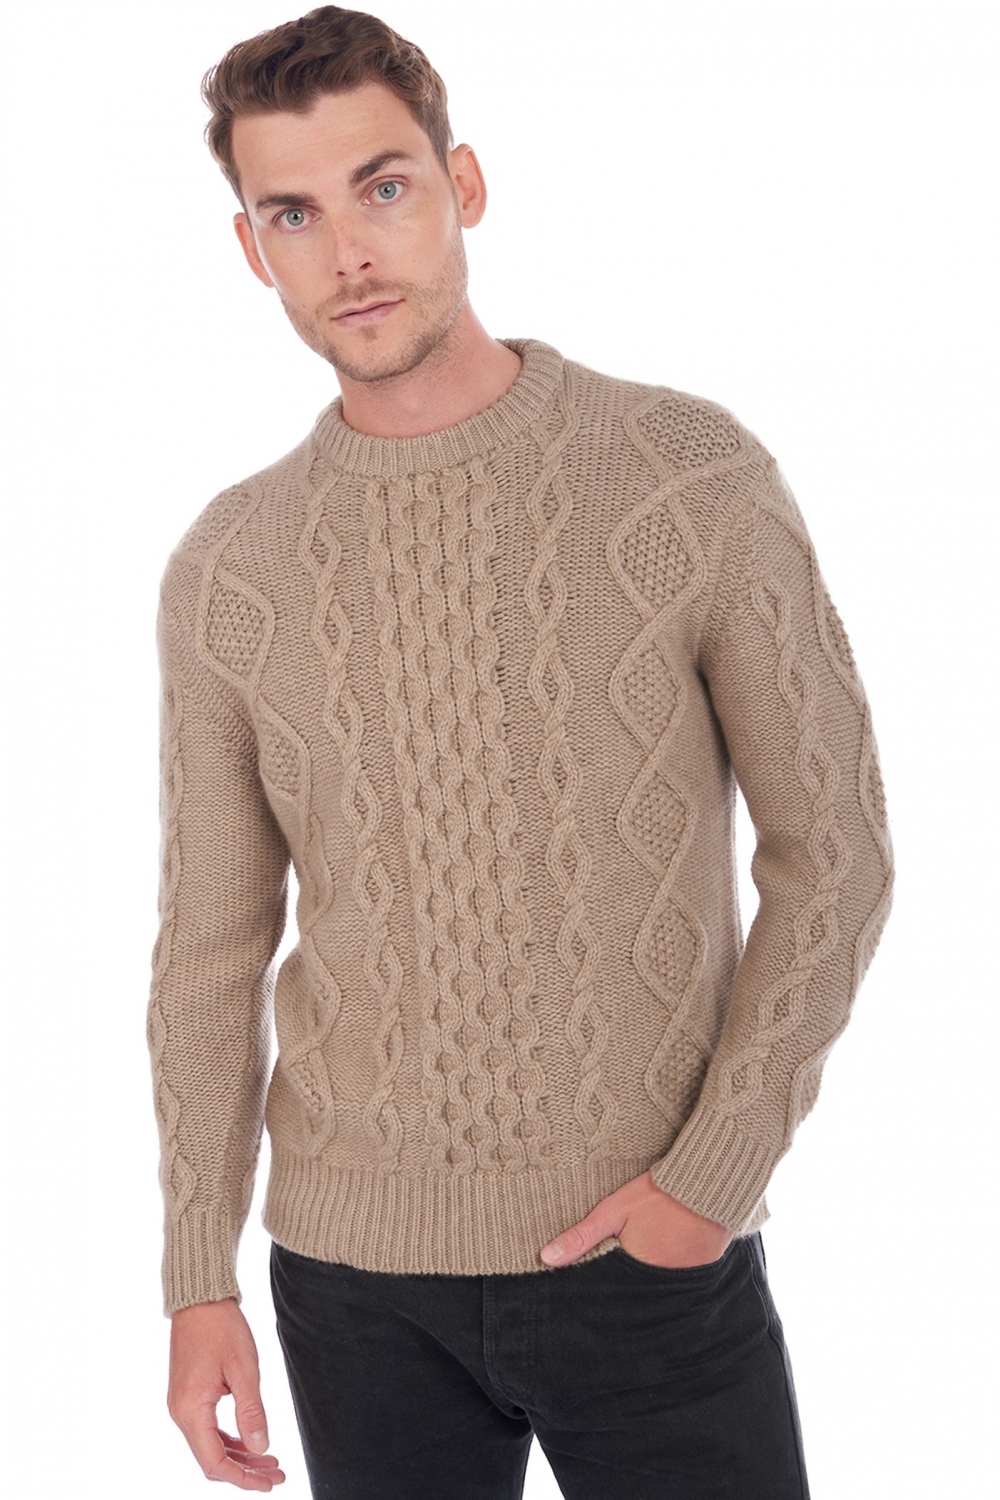 Cashmere men chunky sweater acharnes natural stone 2xl